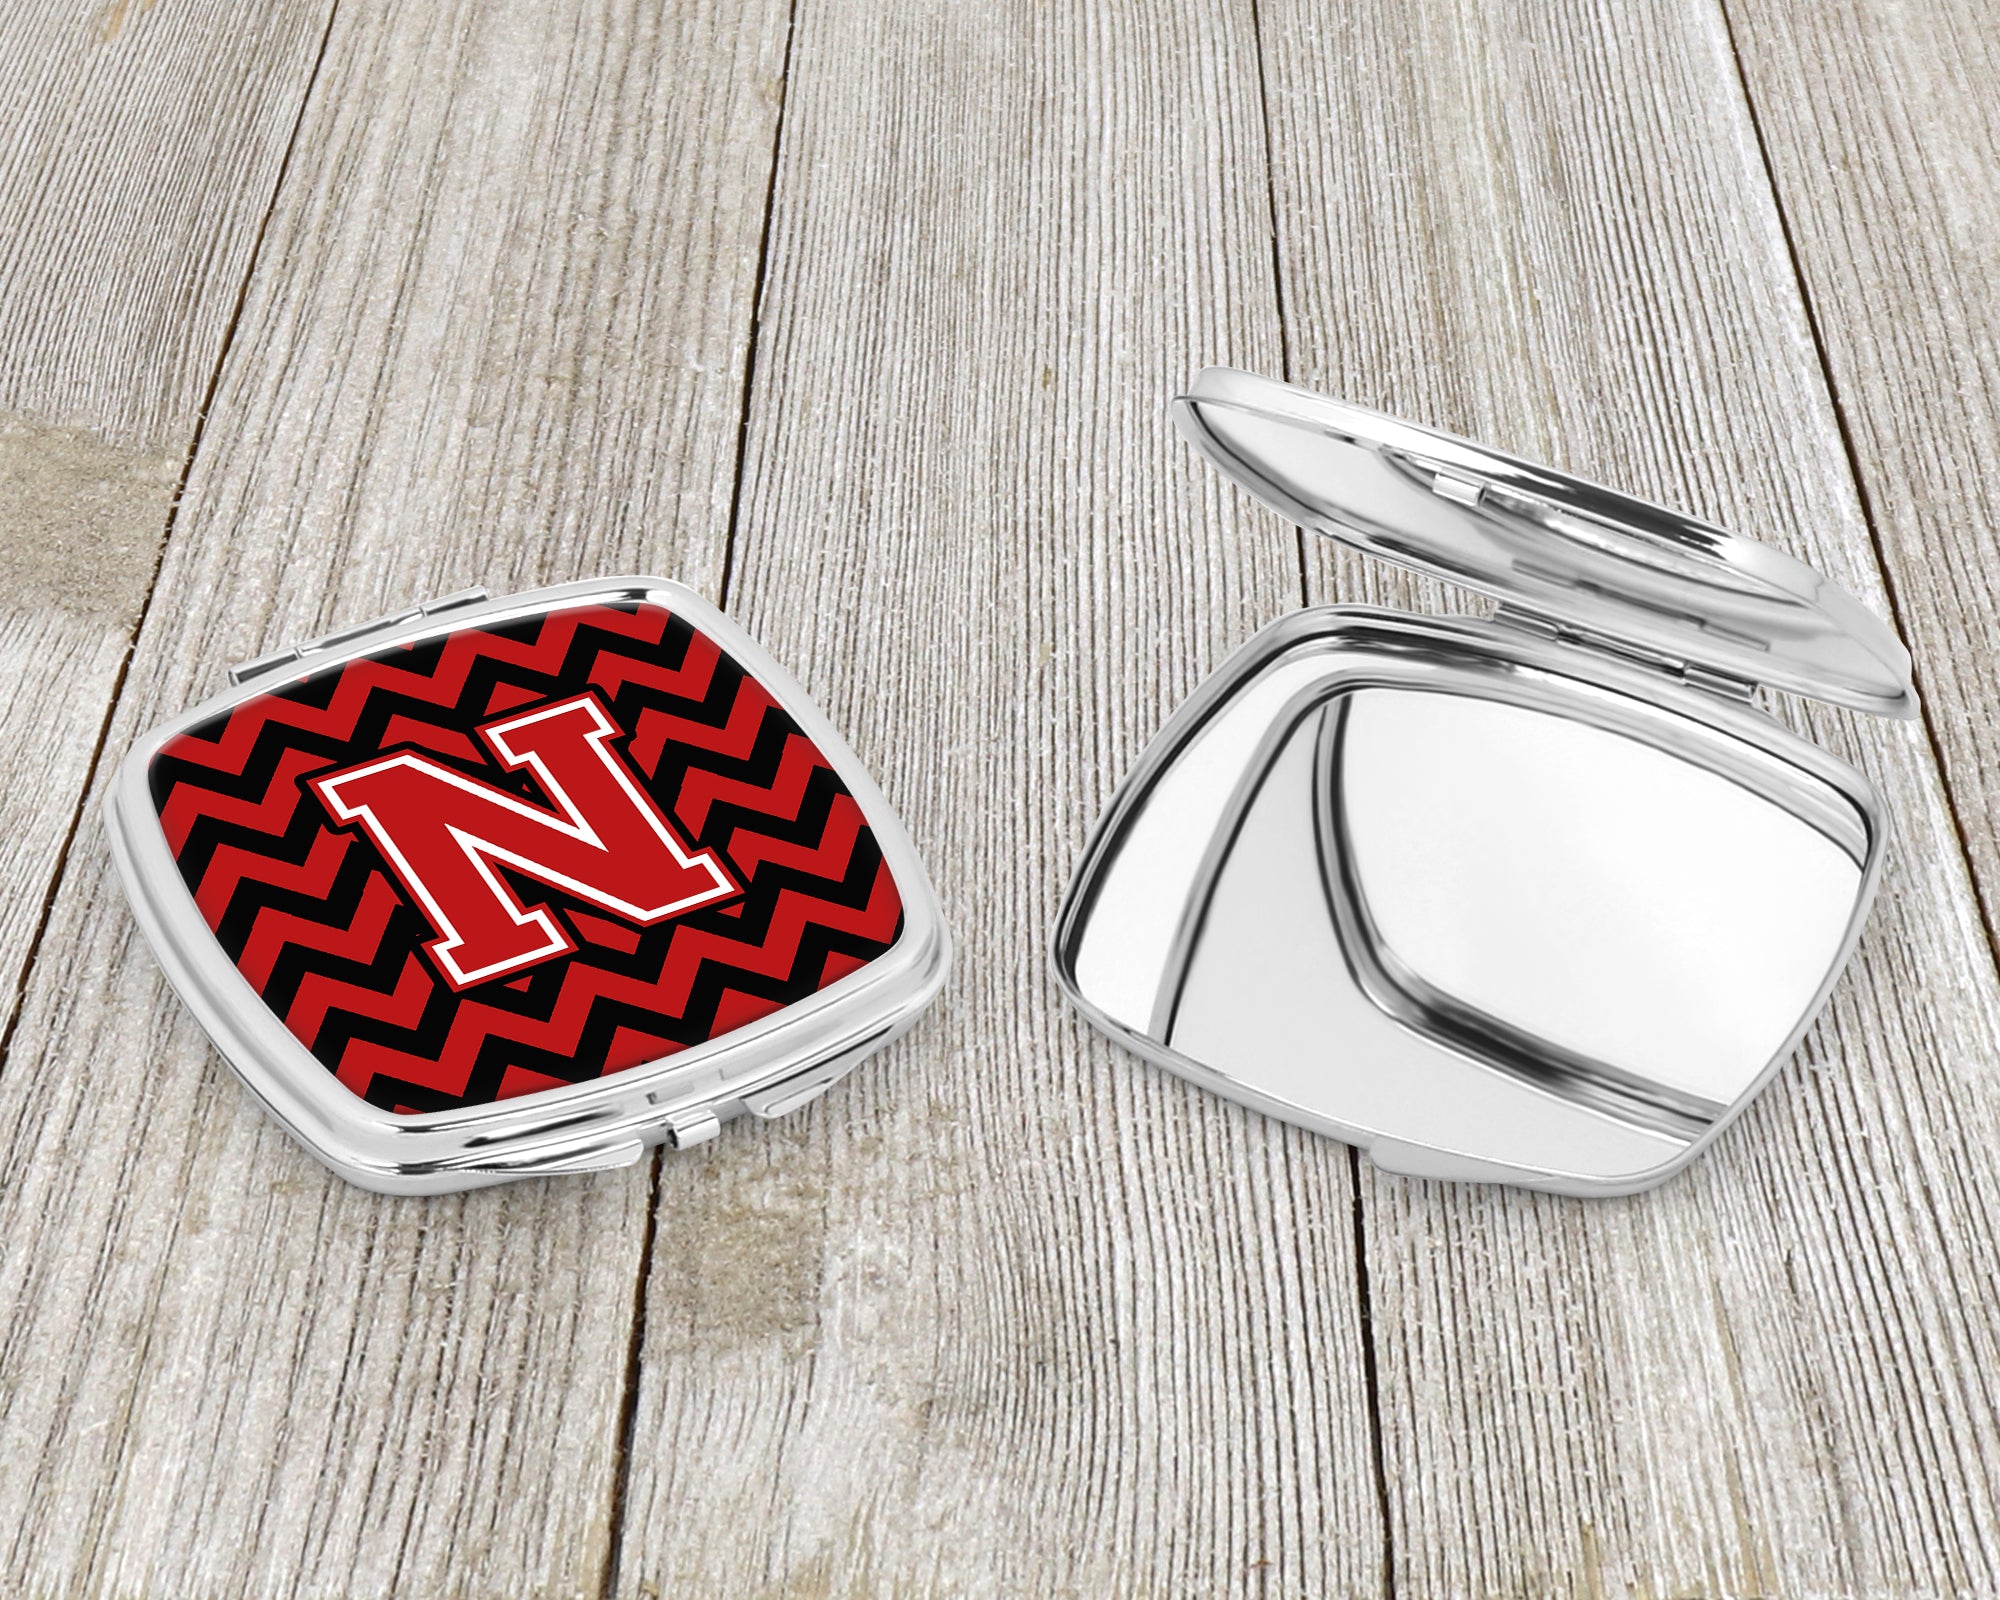 Letter N Chevron Black and Red   Compact Mirror CJ1047-NSCM  the-store.com.